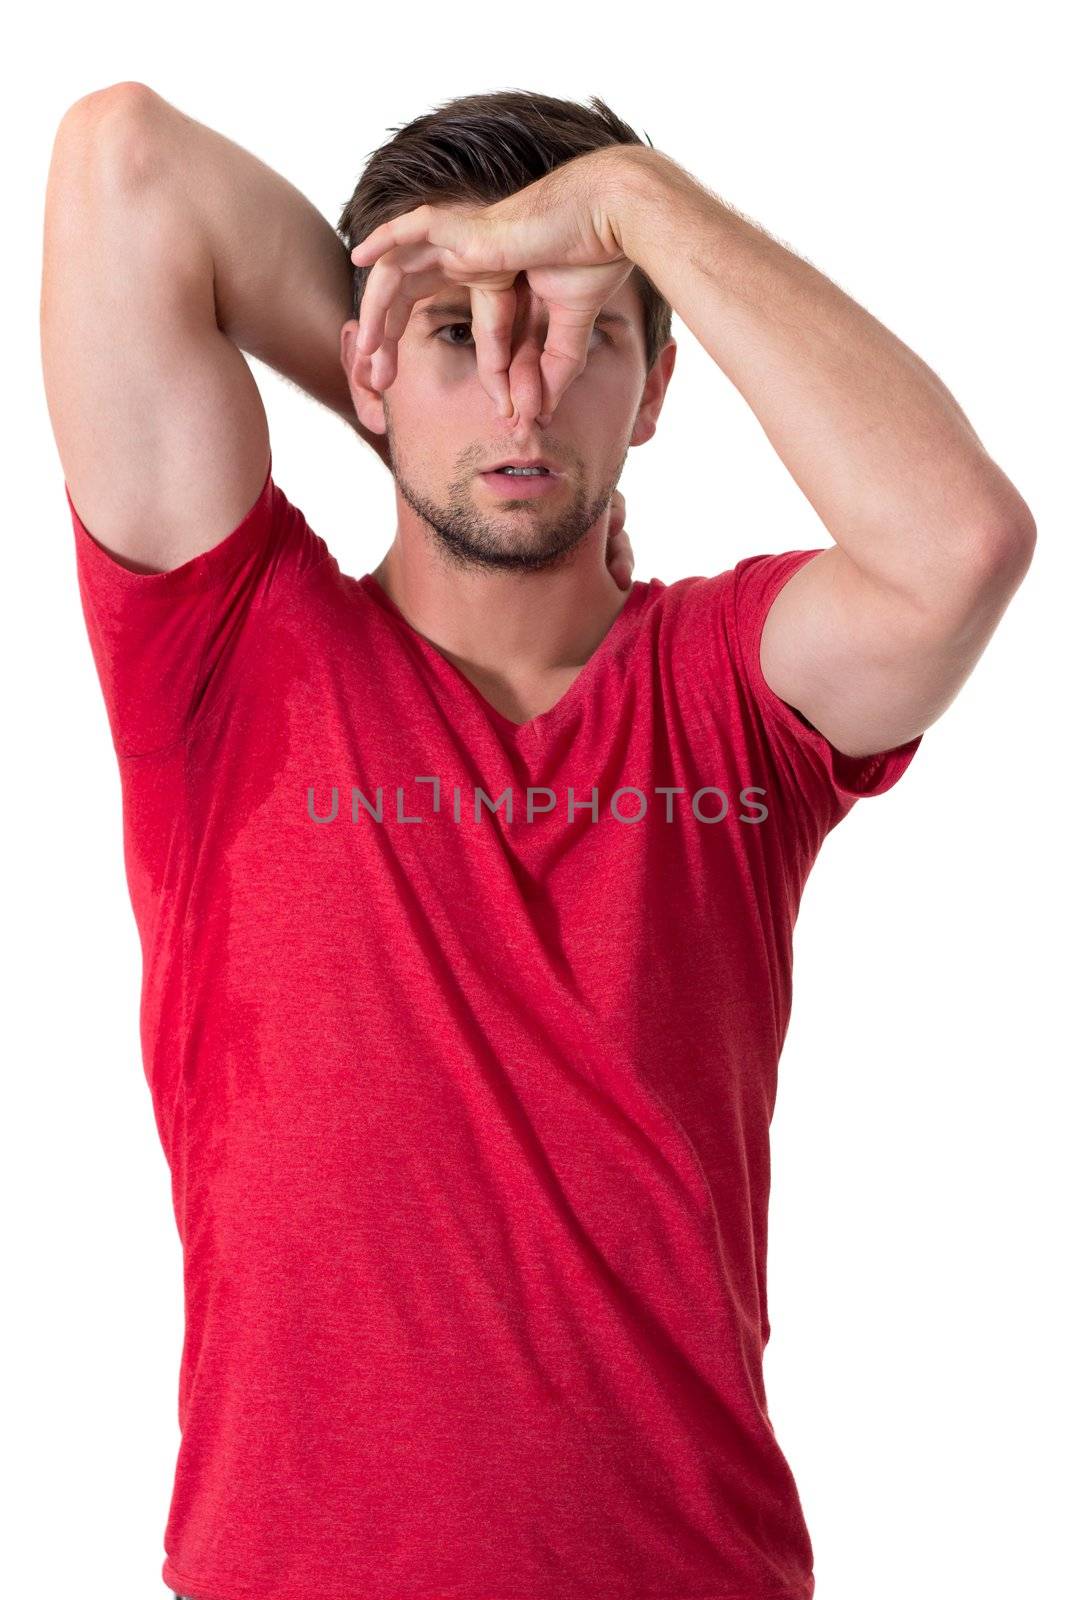 Man sweating very badly under armpit and holding nose by dwaschnig_photo